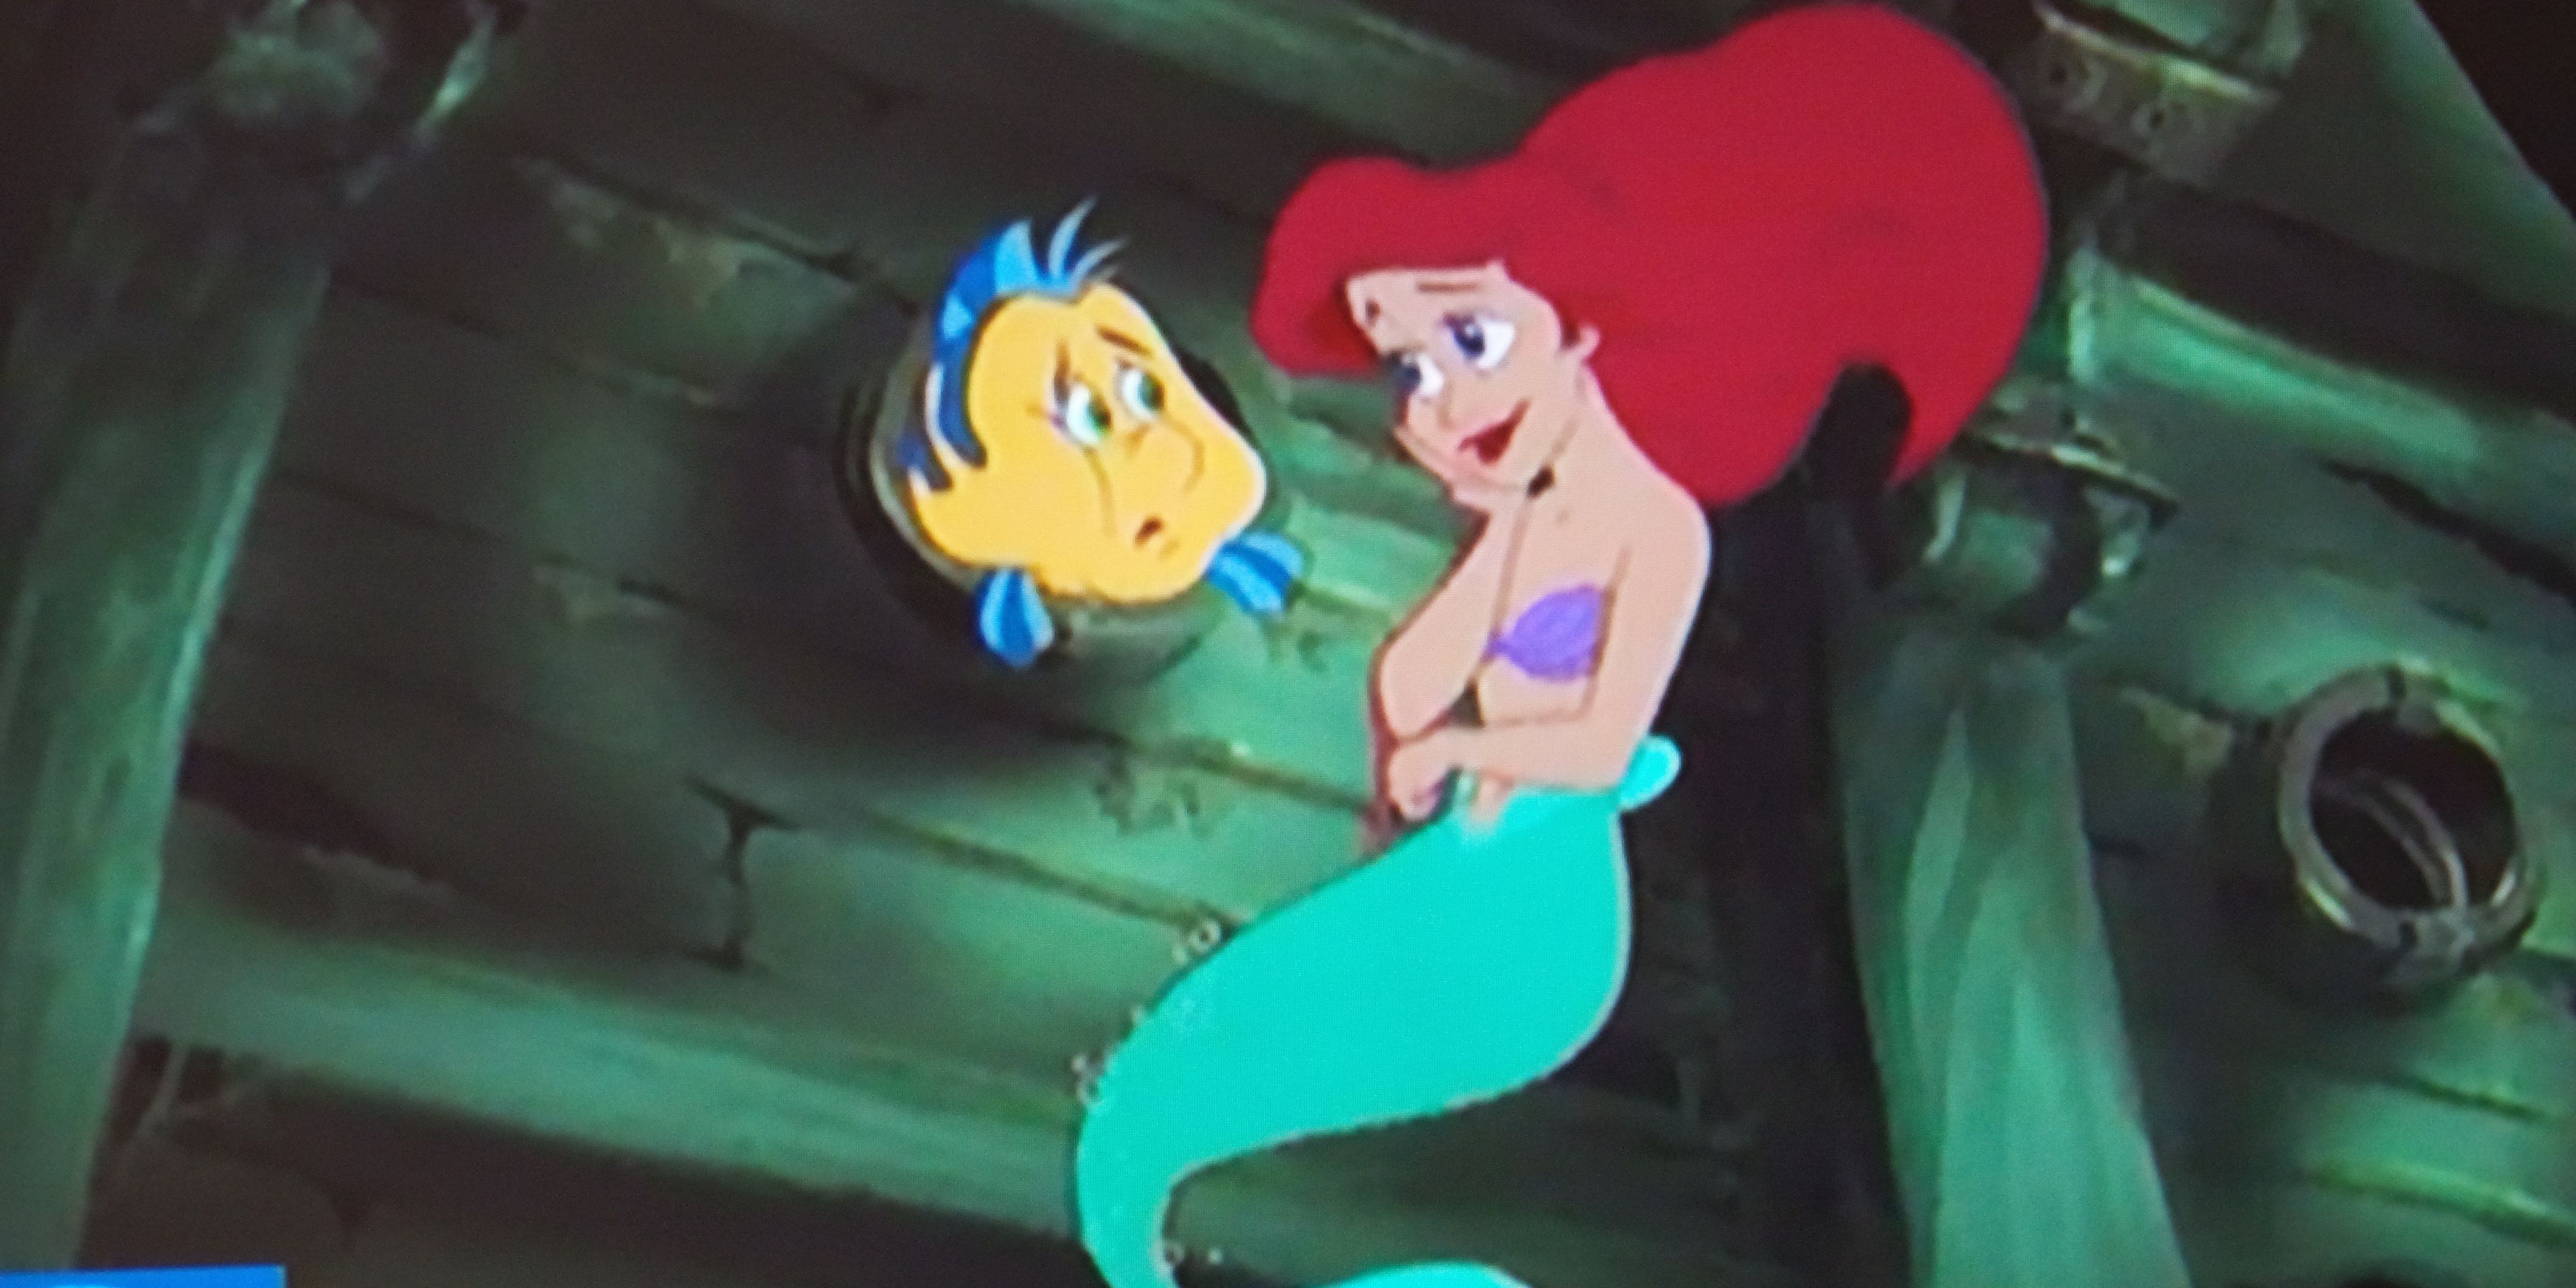 Ariel and Flounder from The Little Mermaid in the wreckage of the ship